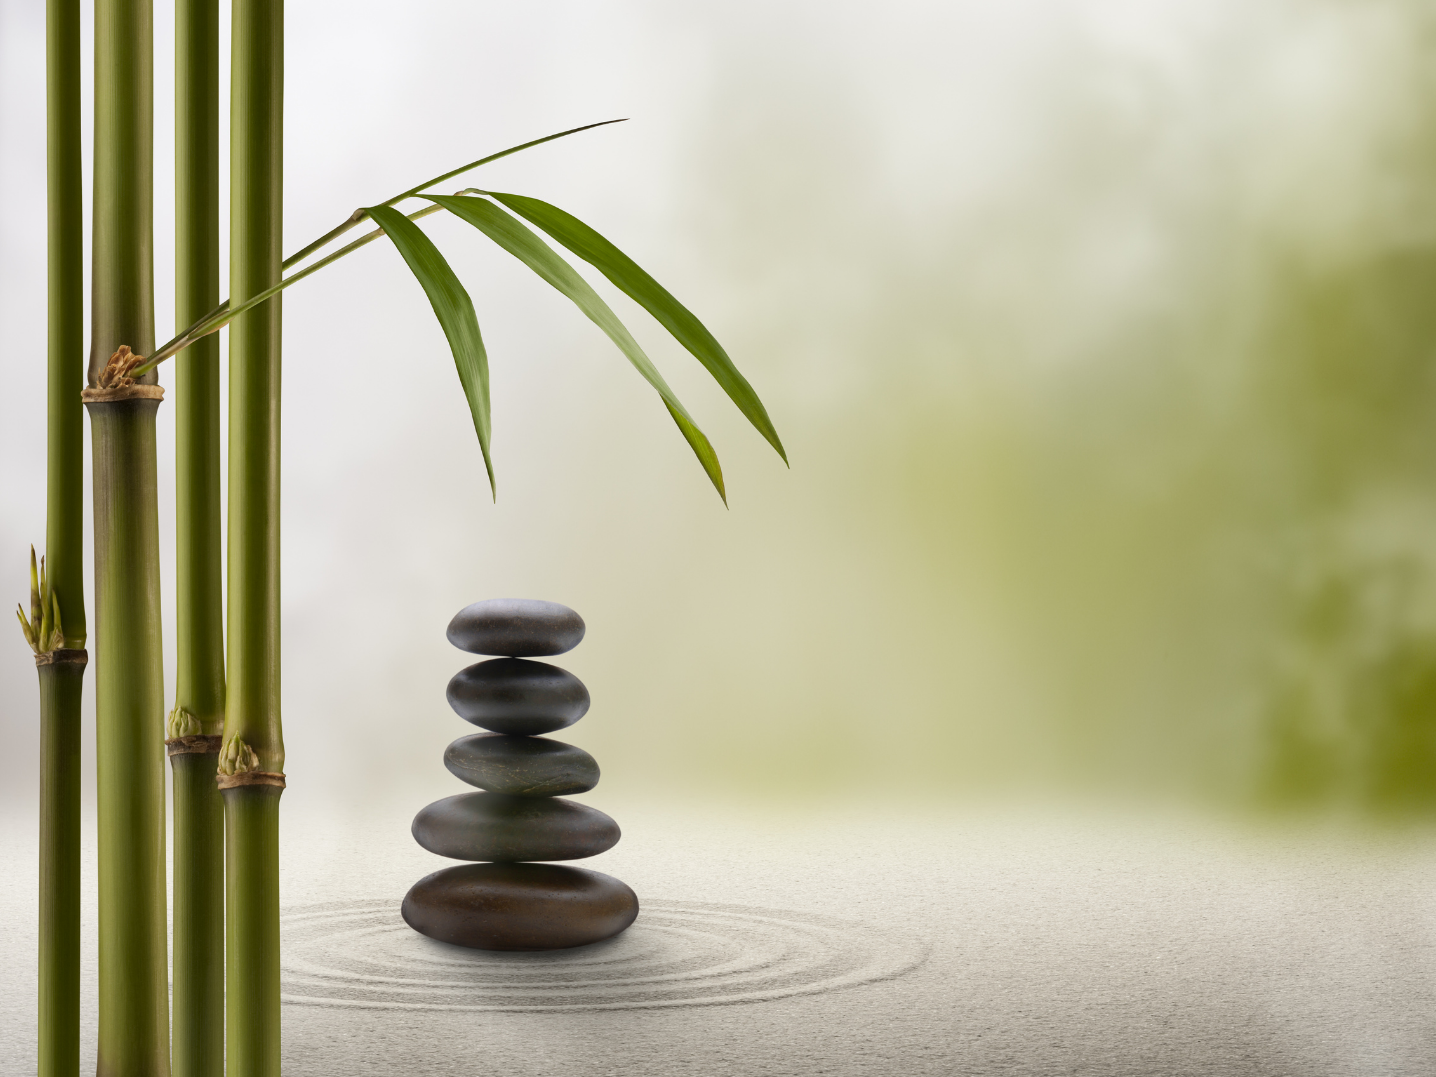 Tranquil photo of some bamboo and a stack of balanced pebbles on some sand